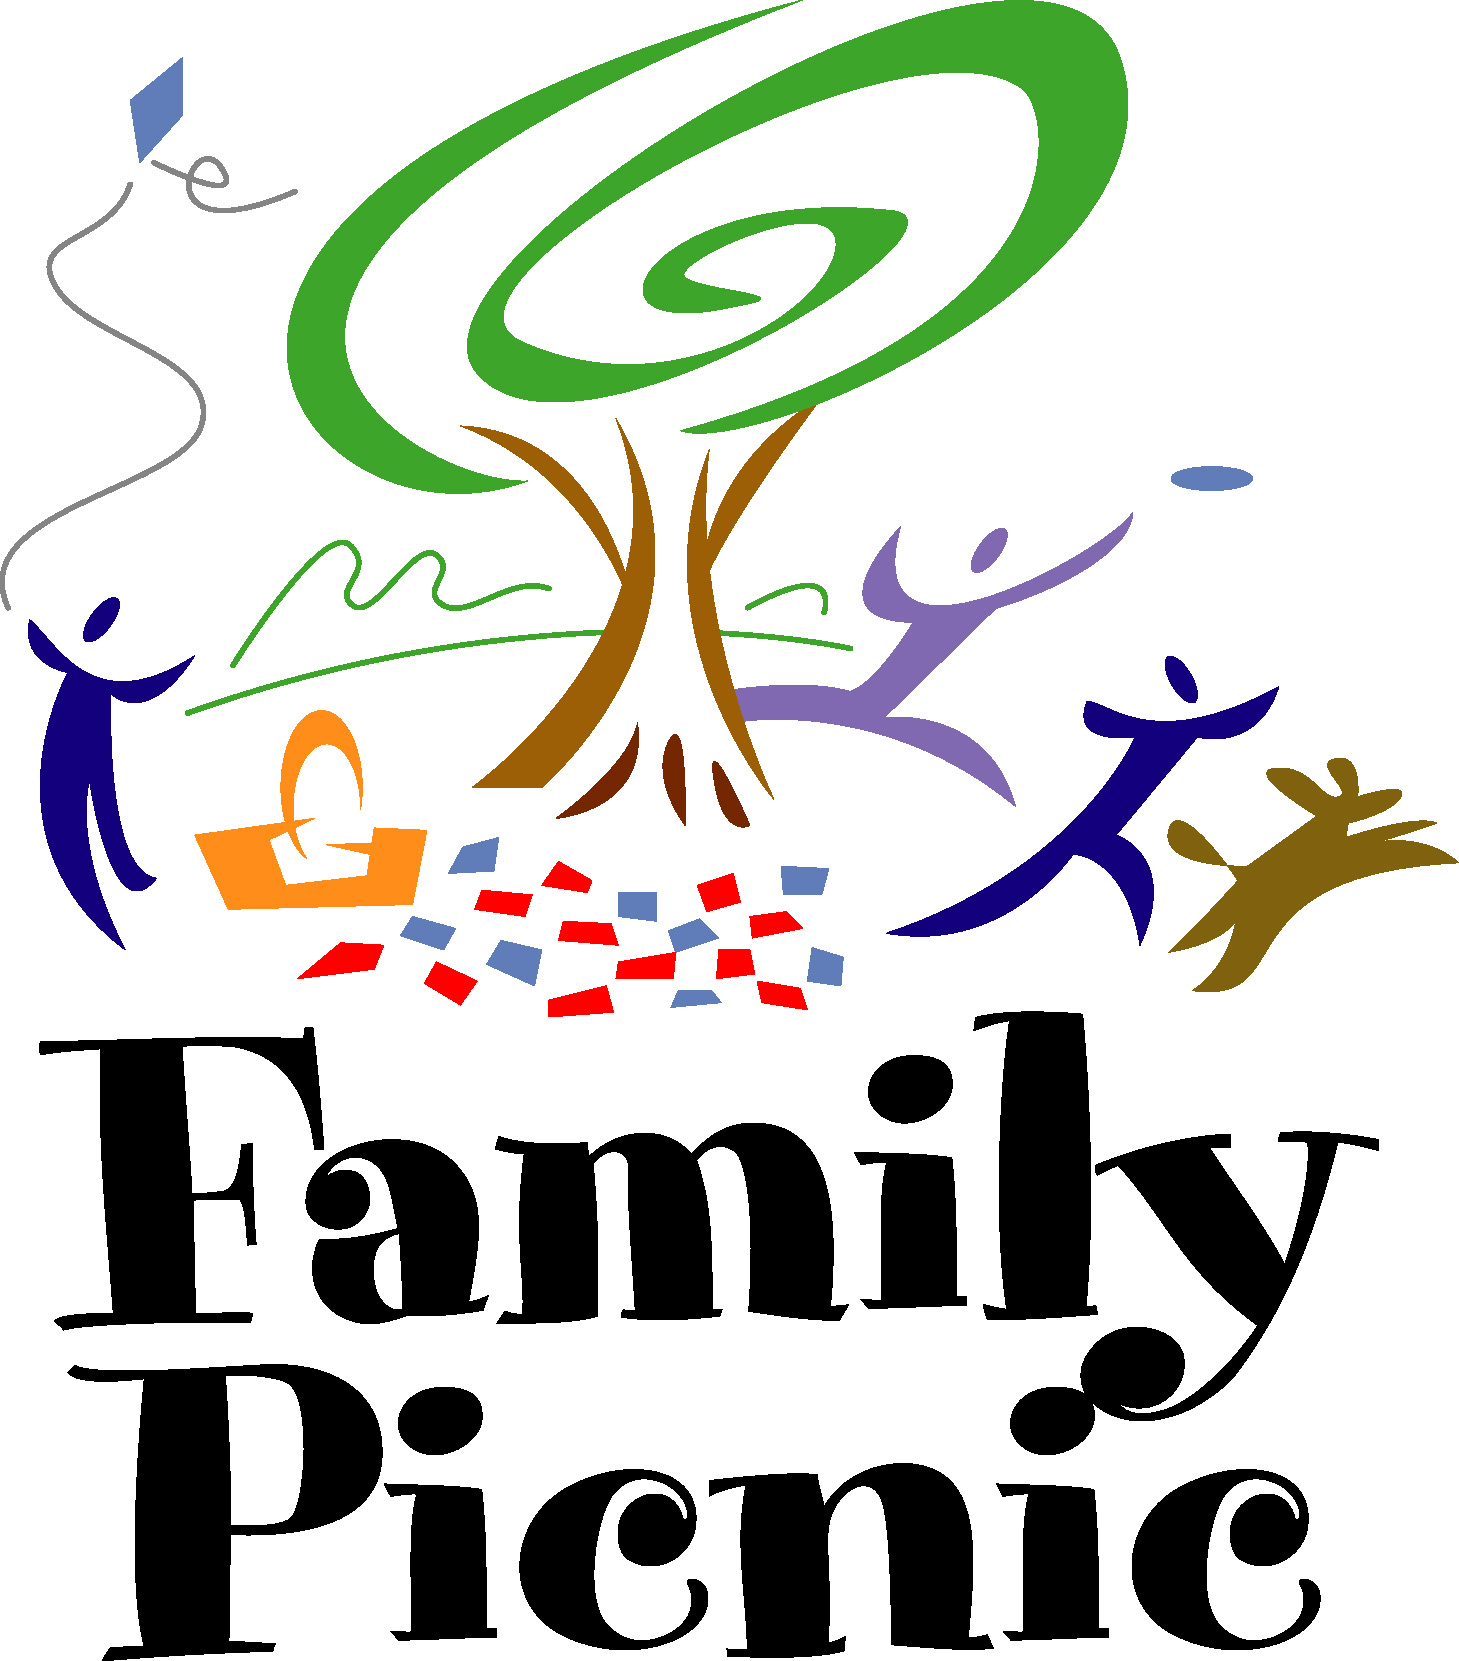 Picnic clip art free - Free Clipart Images